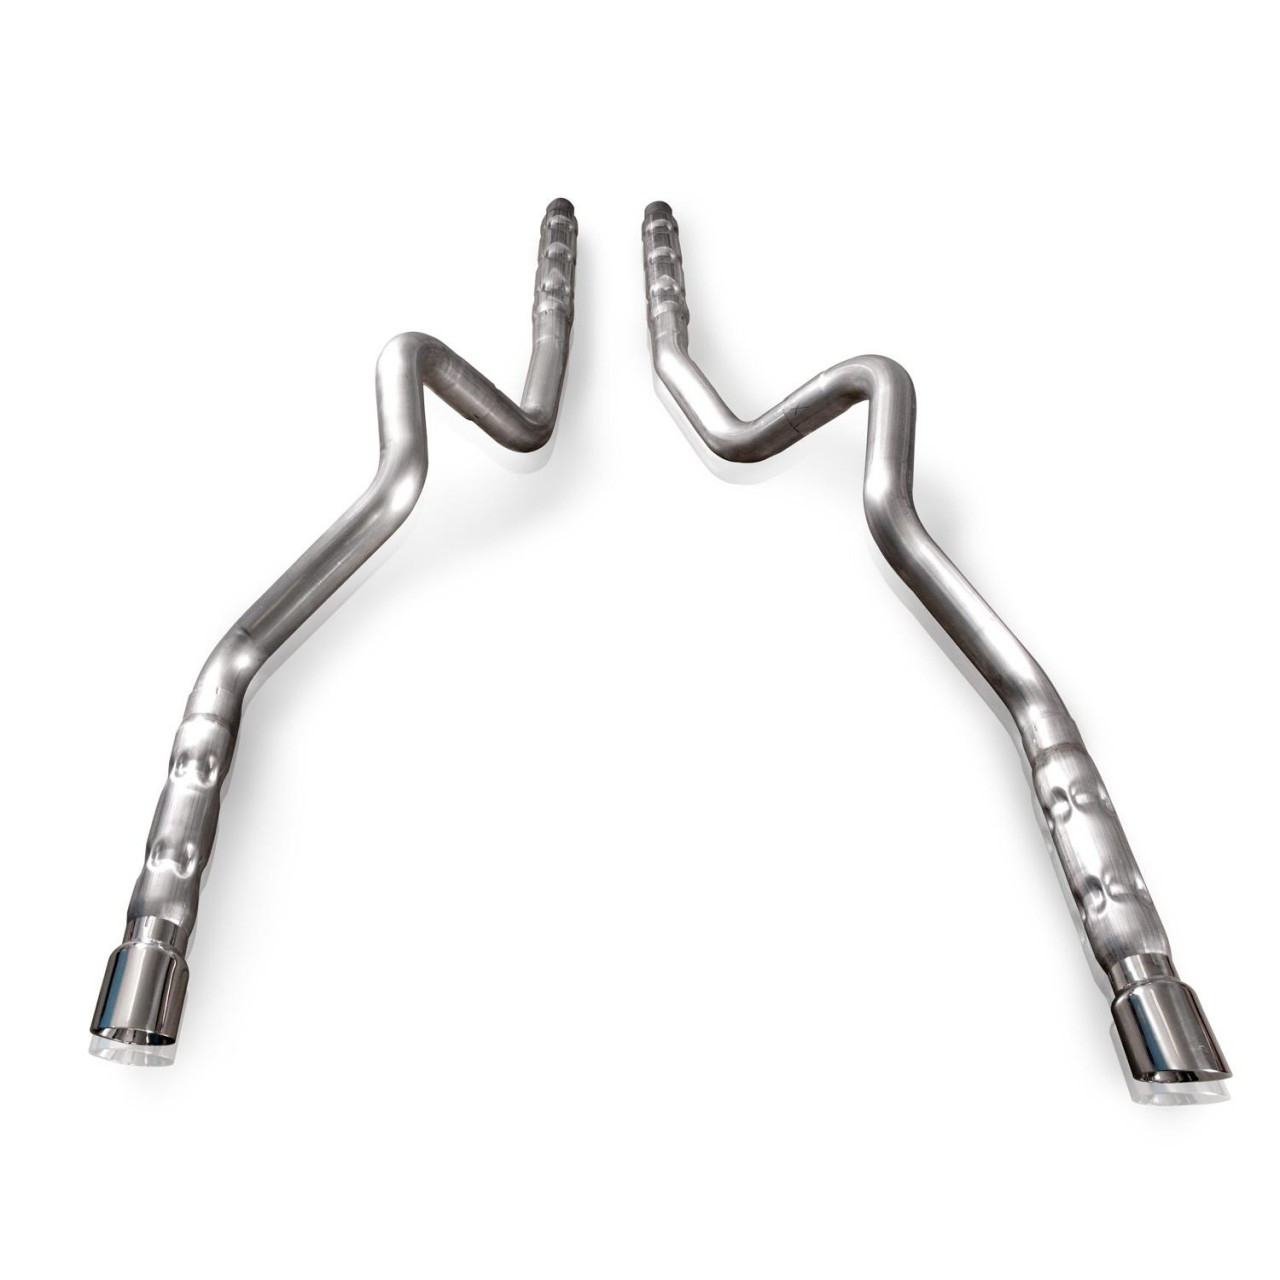 Ford Mustang GT/ Shelby GT500 2011/ 2012 Exhaust: 3